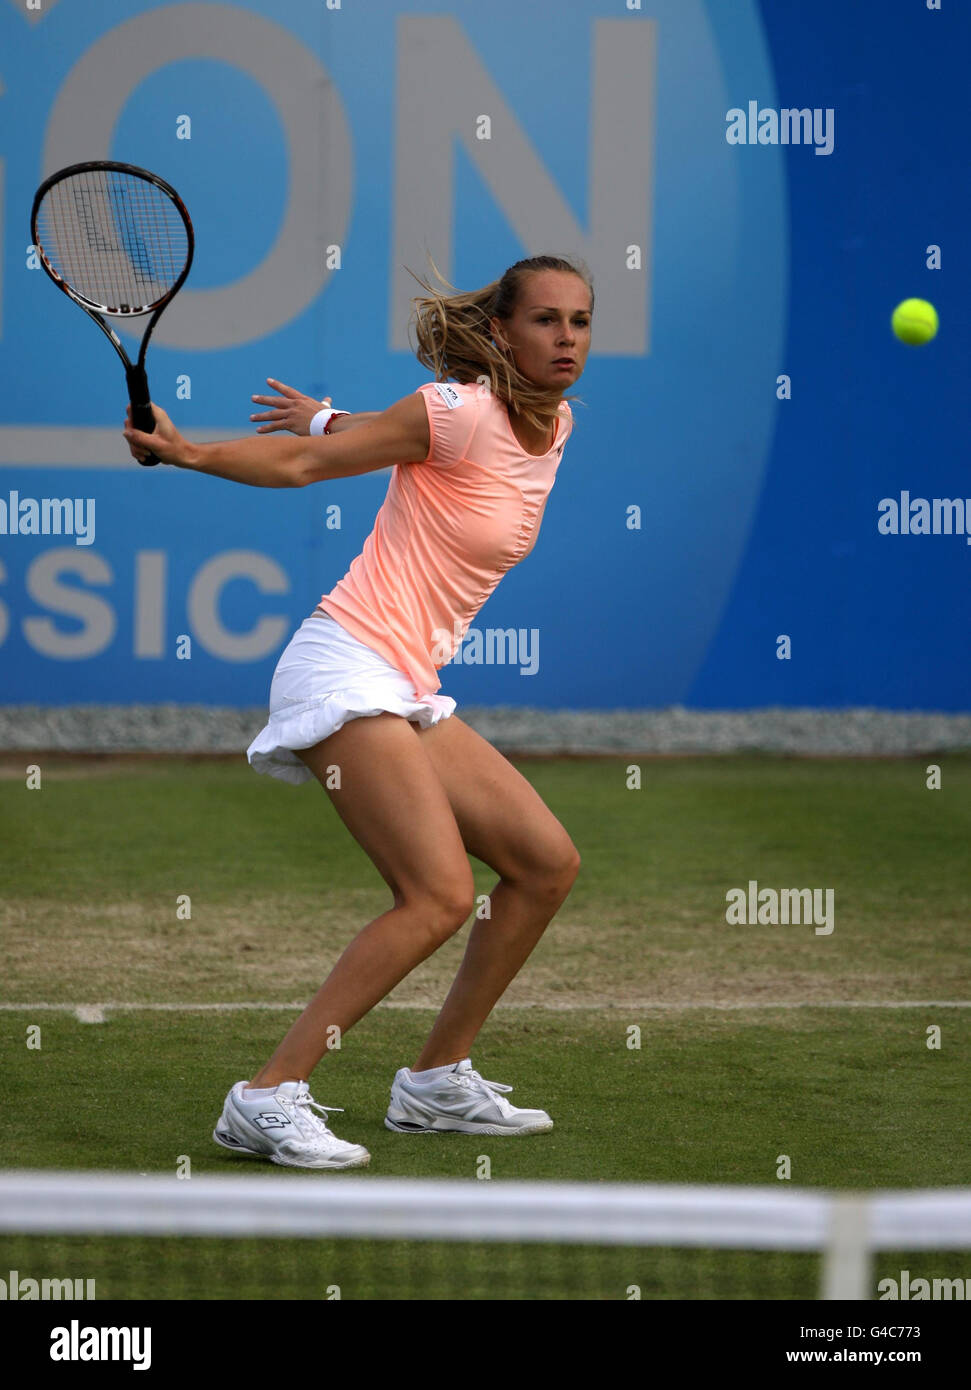 Slovakia's Magdalena Rybarikova in her quarter final match against Germany's Sabine Lisicki during day five of the AEGON Classic at Edgbaston Priory Club, Birmingham. Stock Photo